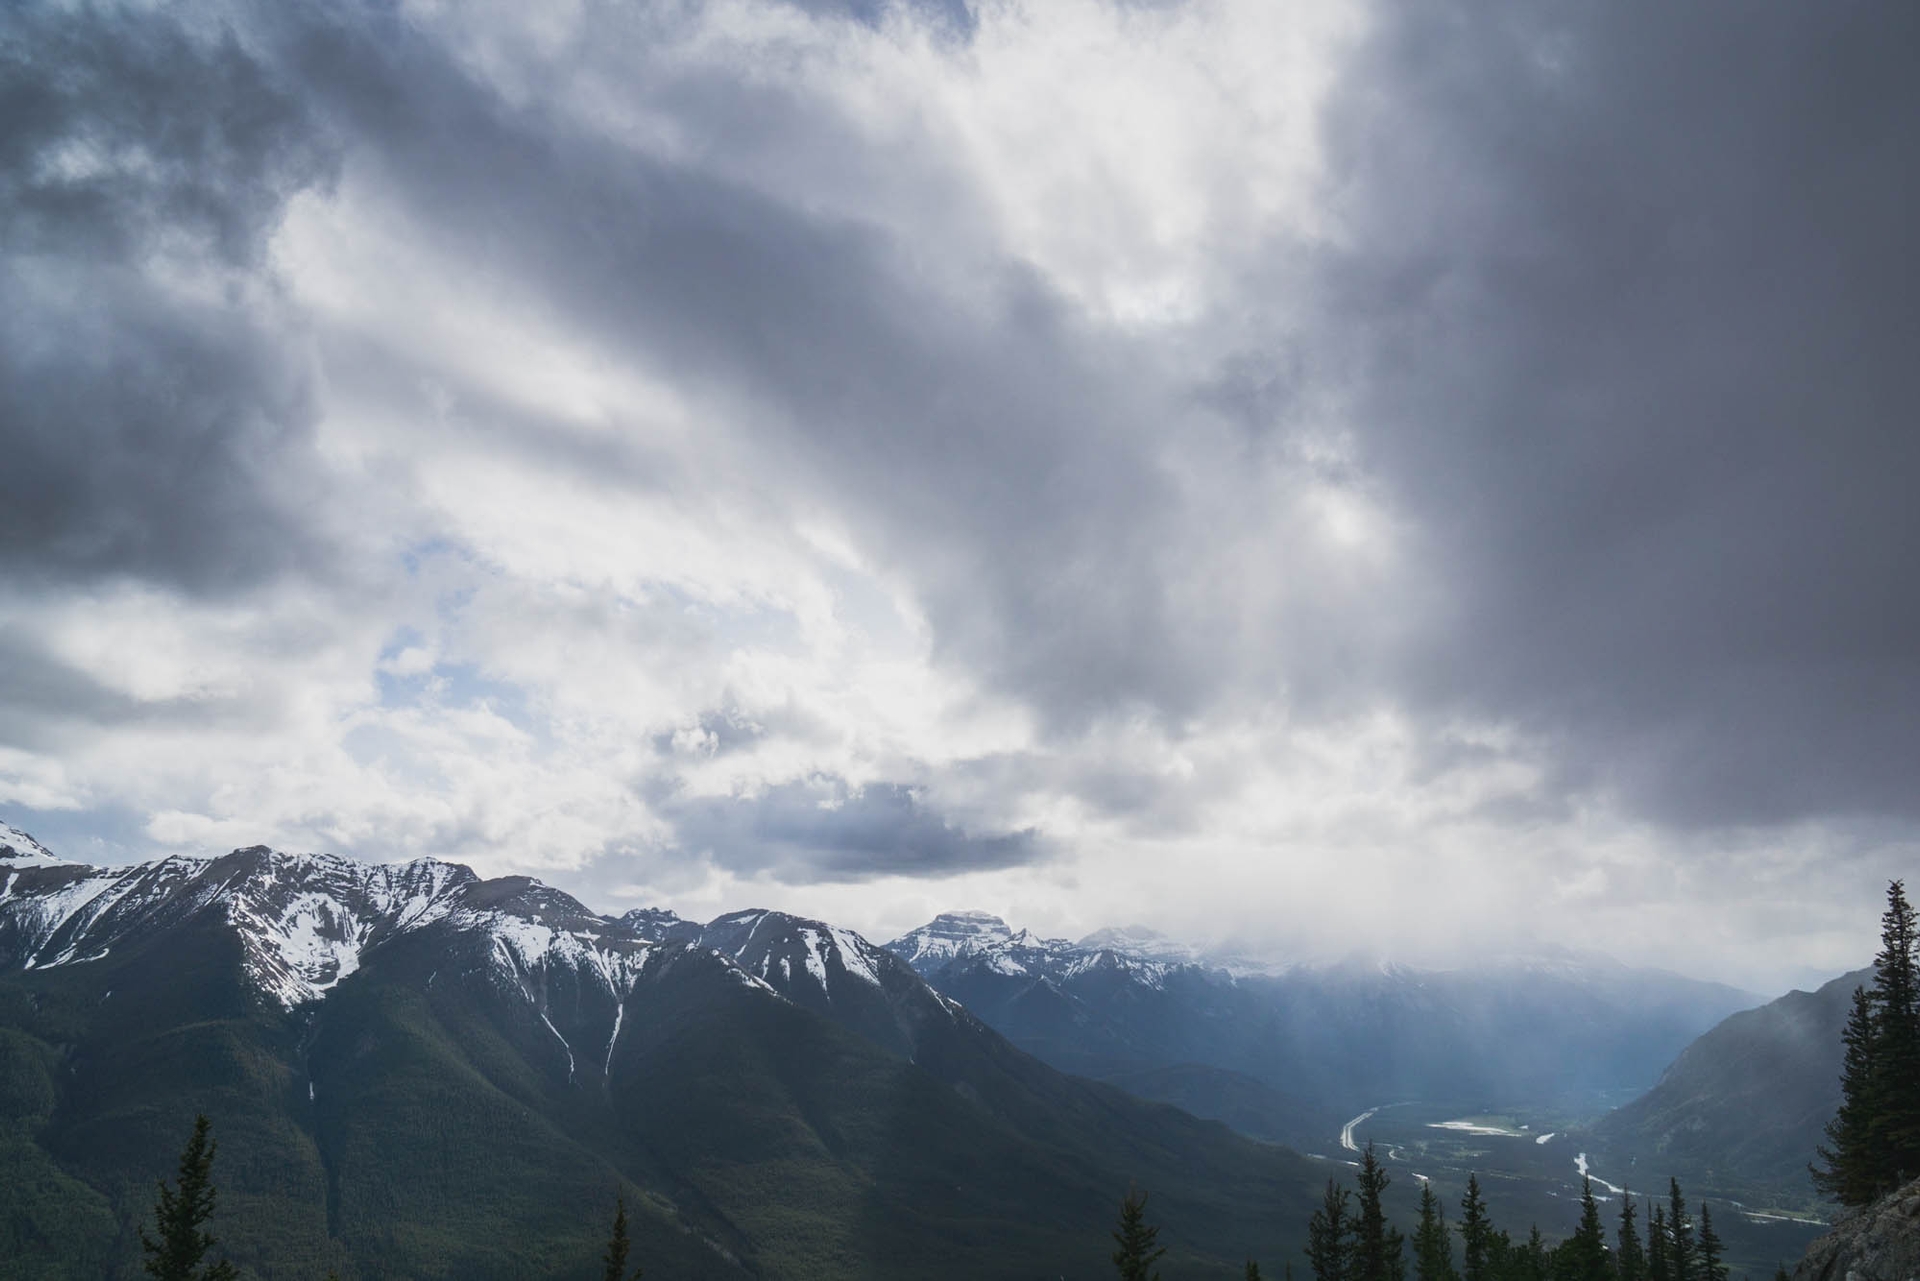 A view of the Canadian Rocky Mountains at the top of the Banff Gondola in Alberta, Canada